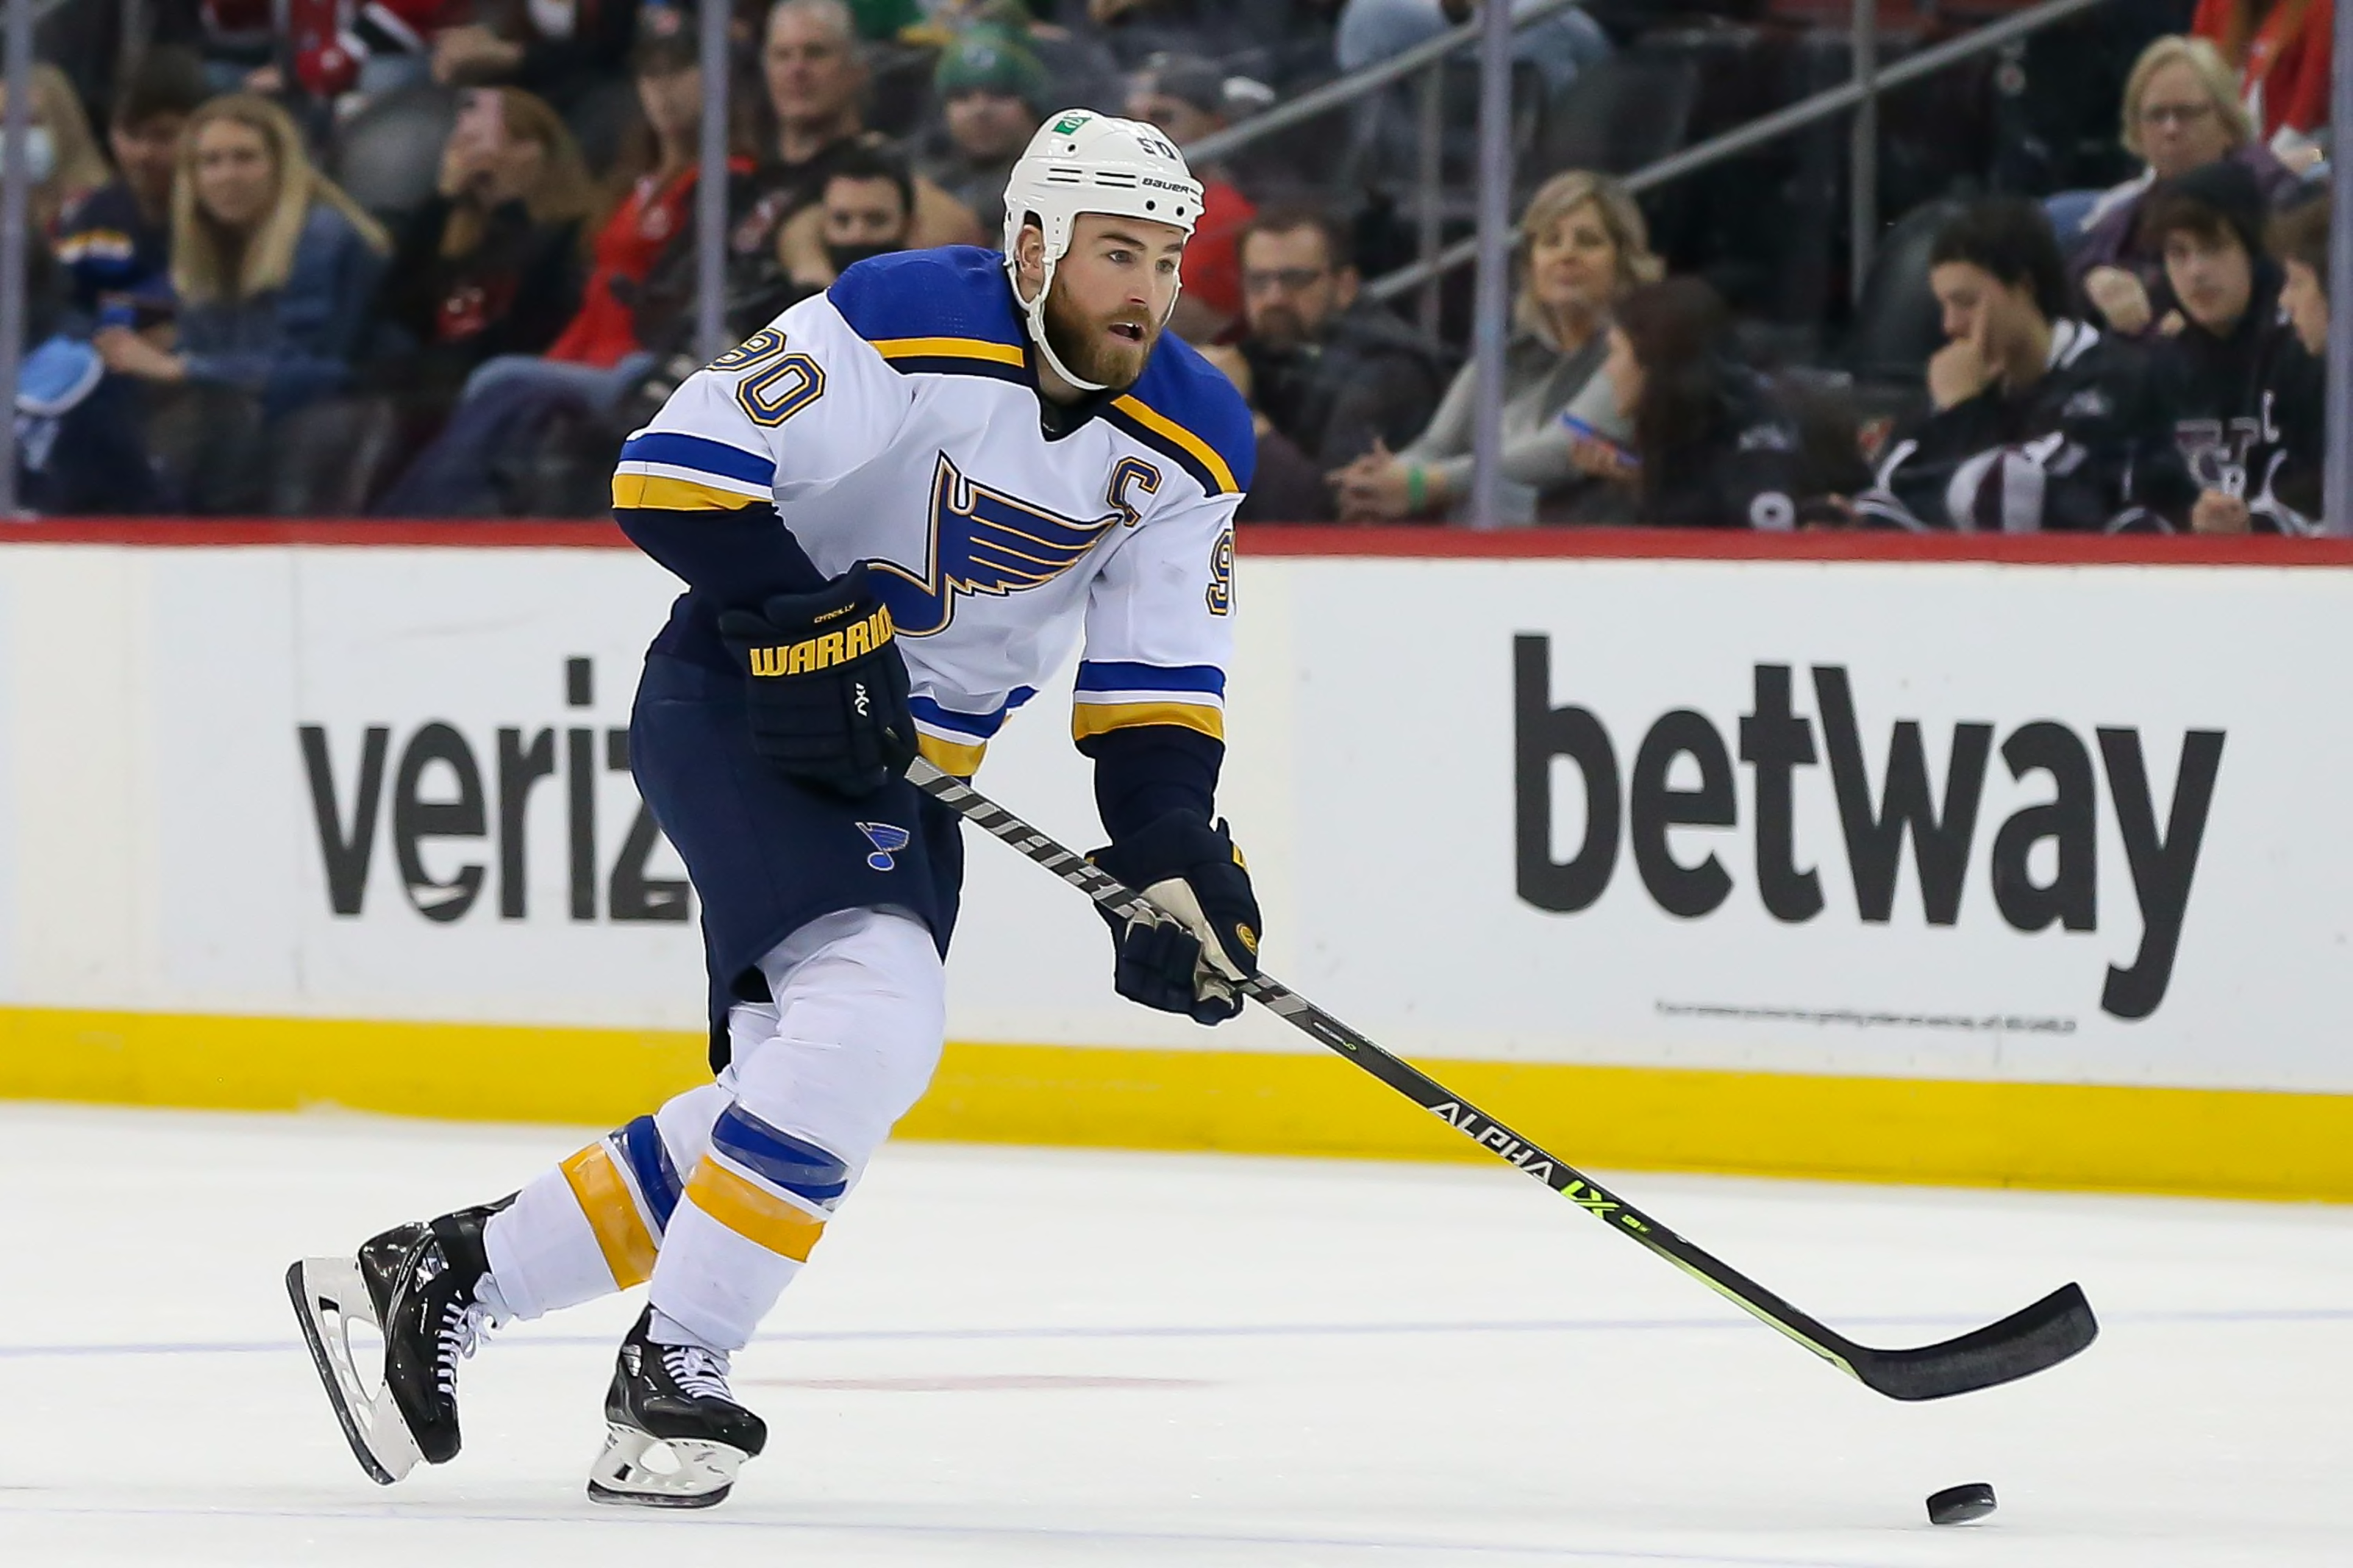 NHL Rumors: New Jersey Devils and St. Louis Blues - NHL Rumors